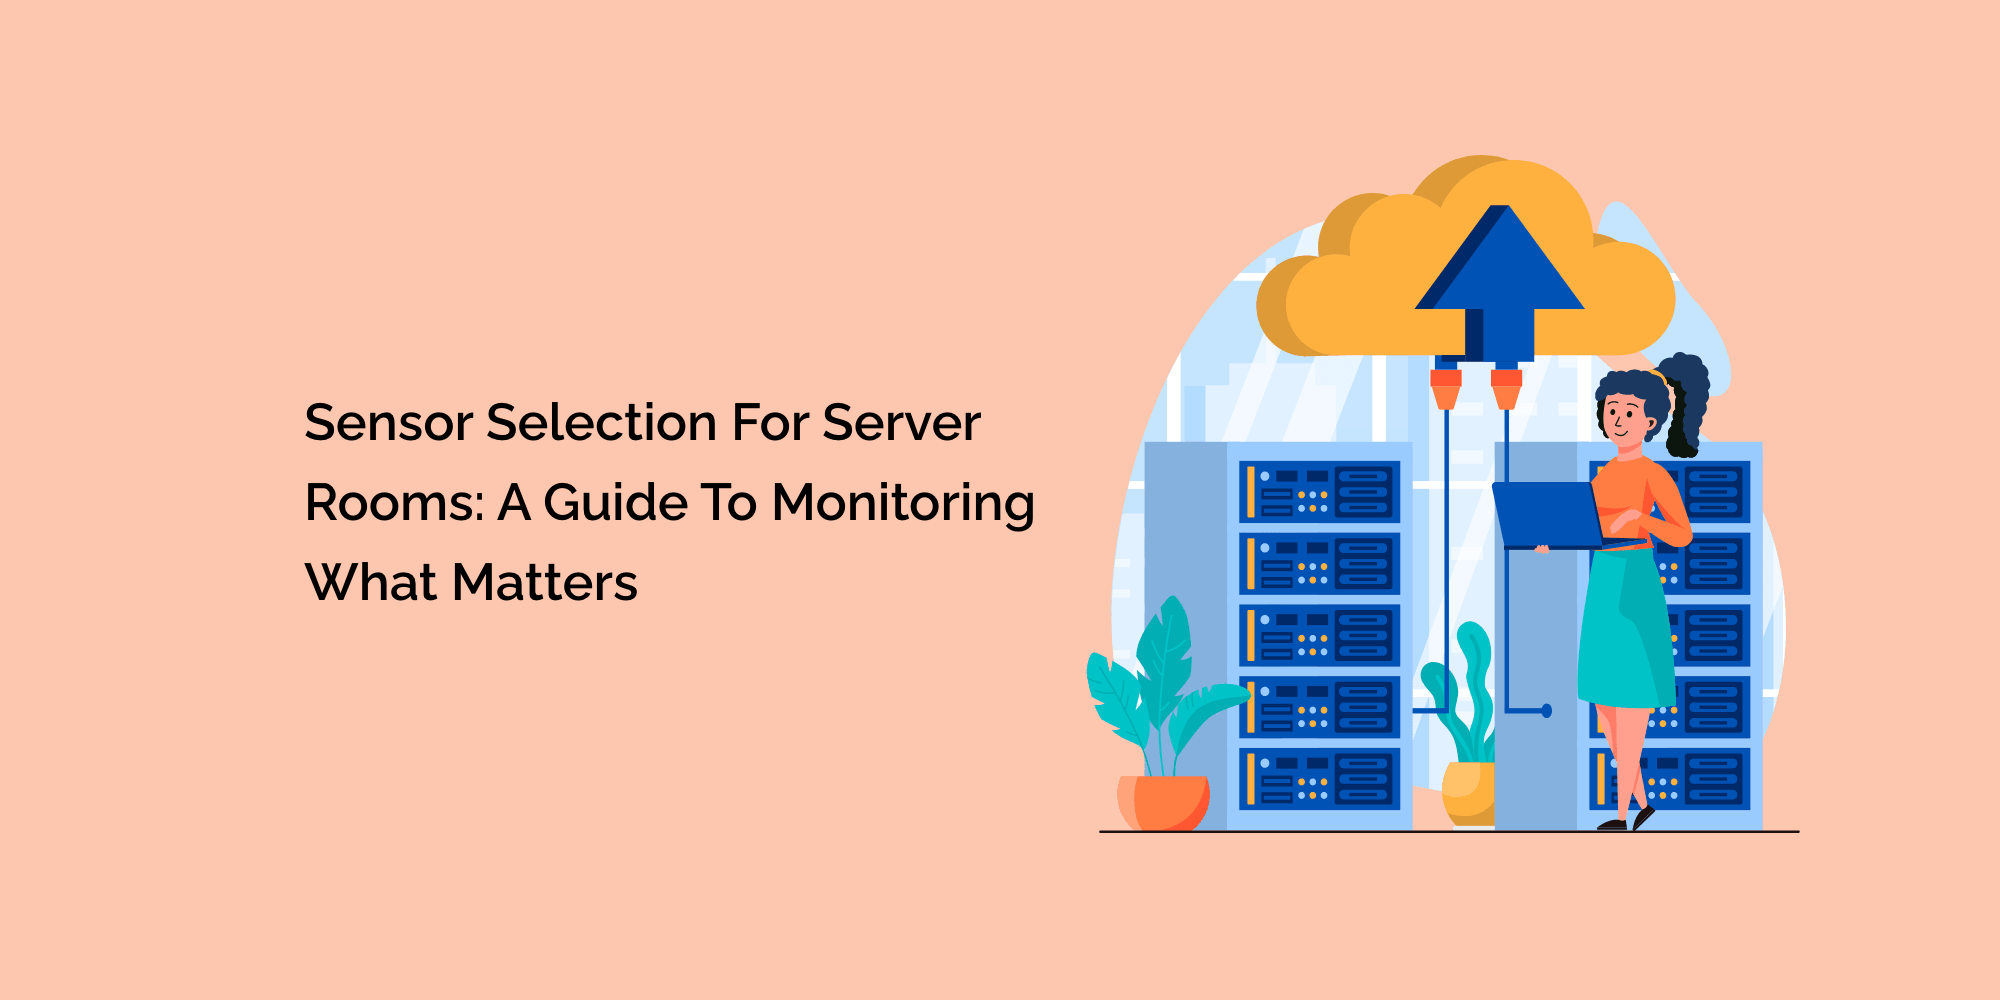 Sensor Selection for Server Rooms: A Guide to Monitoring What Matters